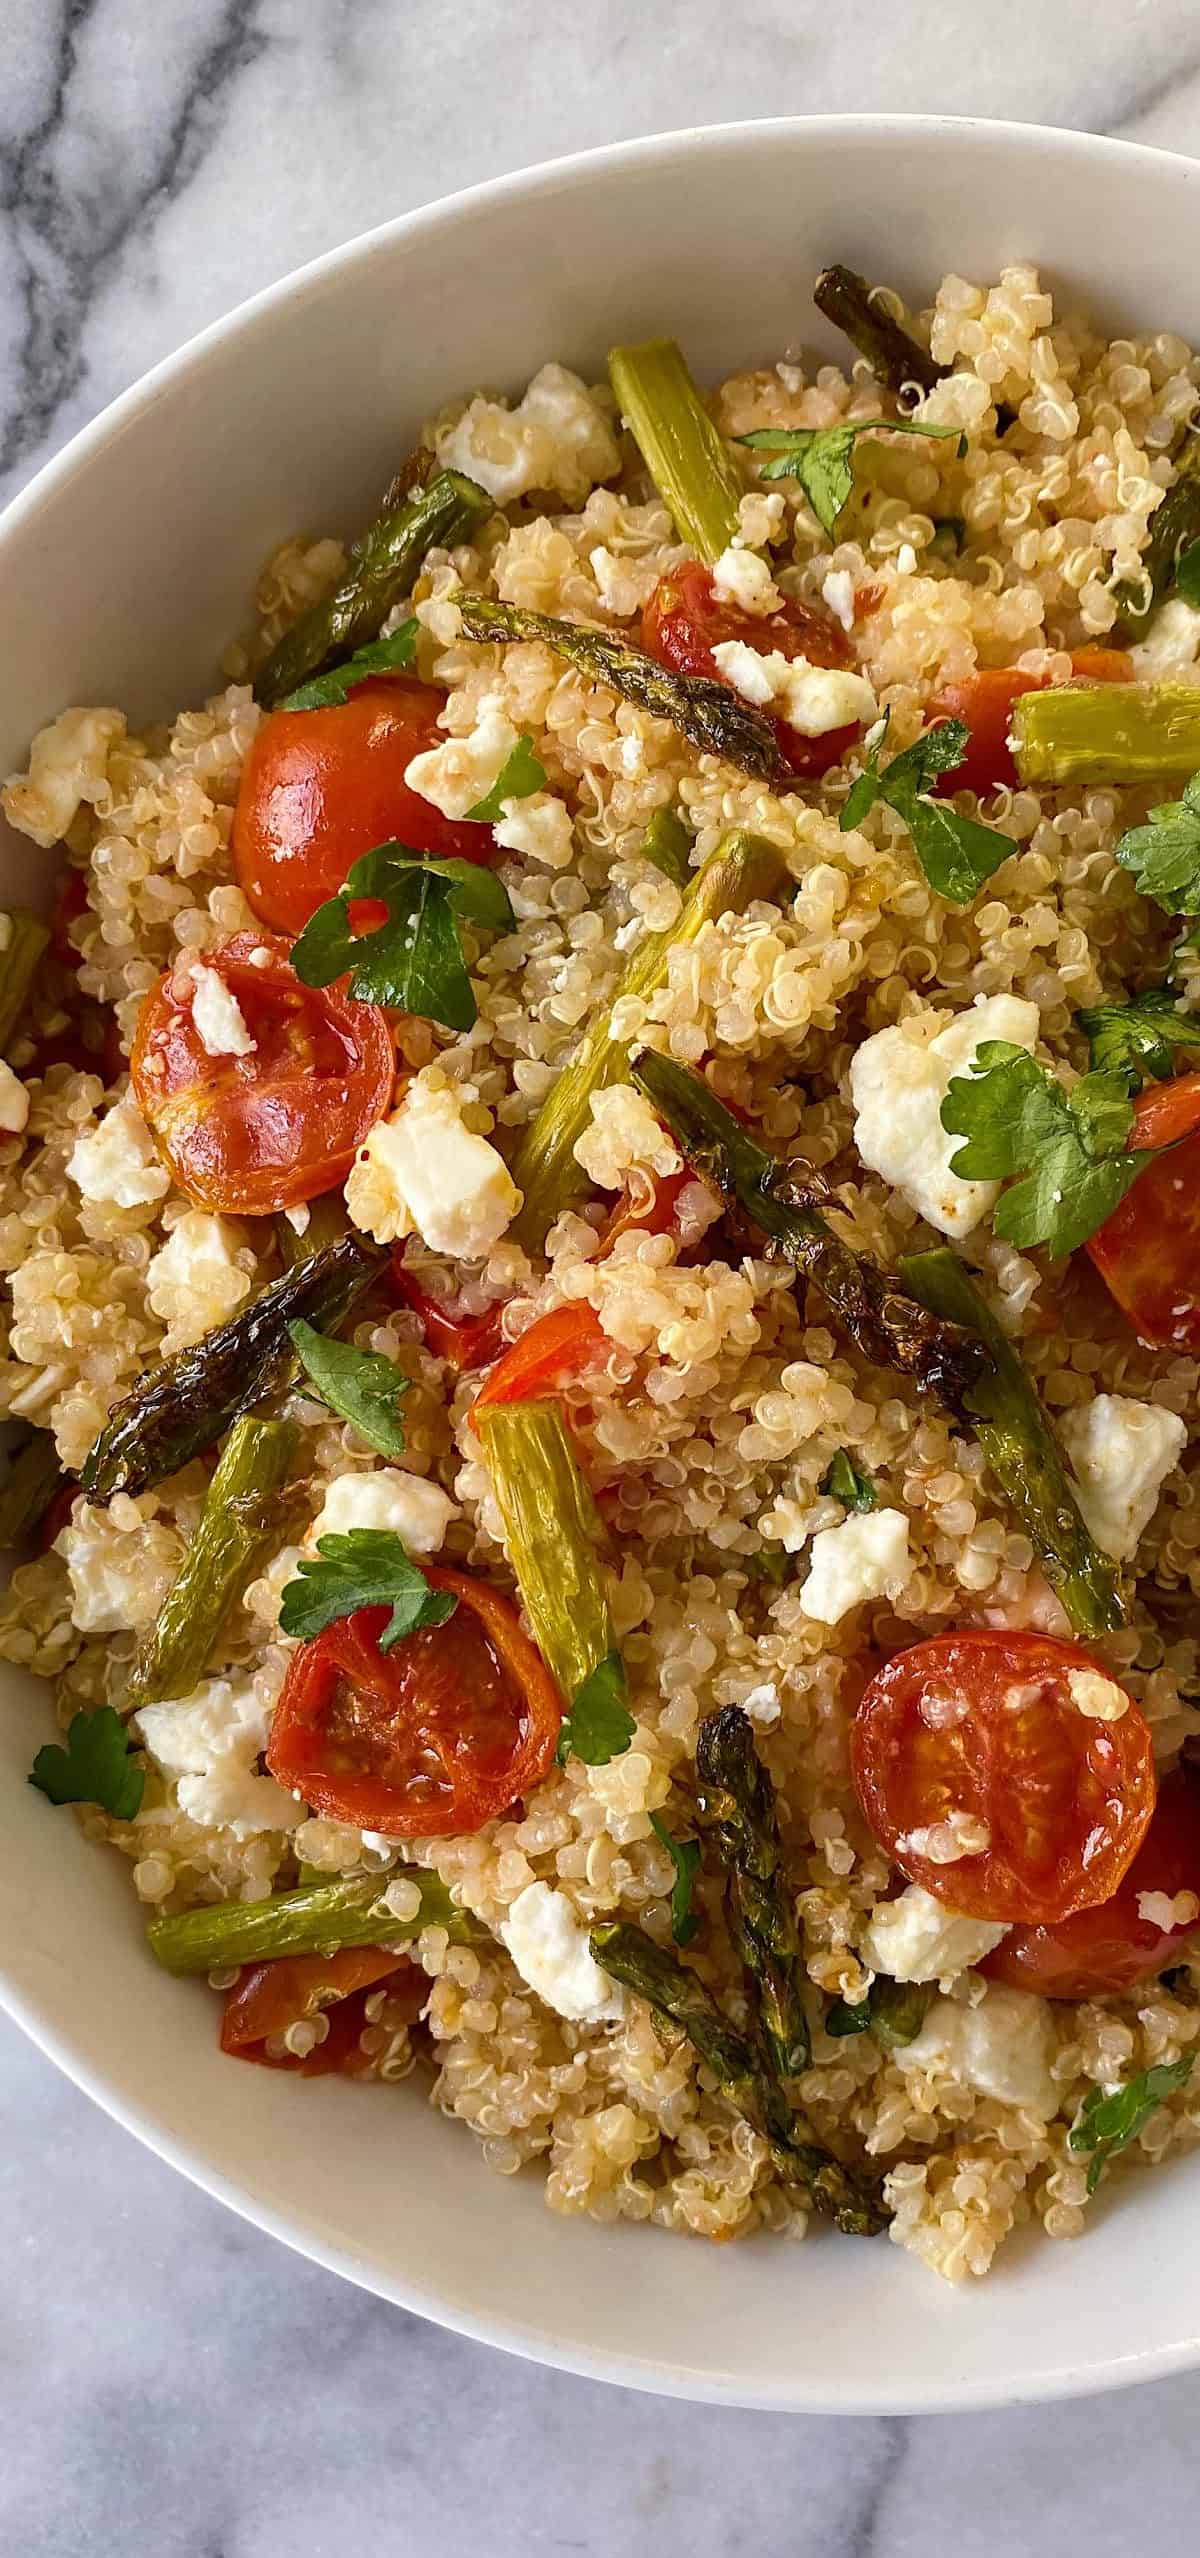  Quinoa, the hero of this salad, brings a nutty and earthy flavor.